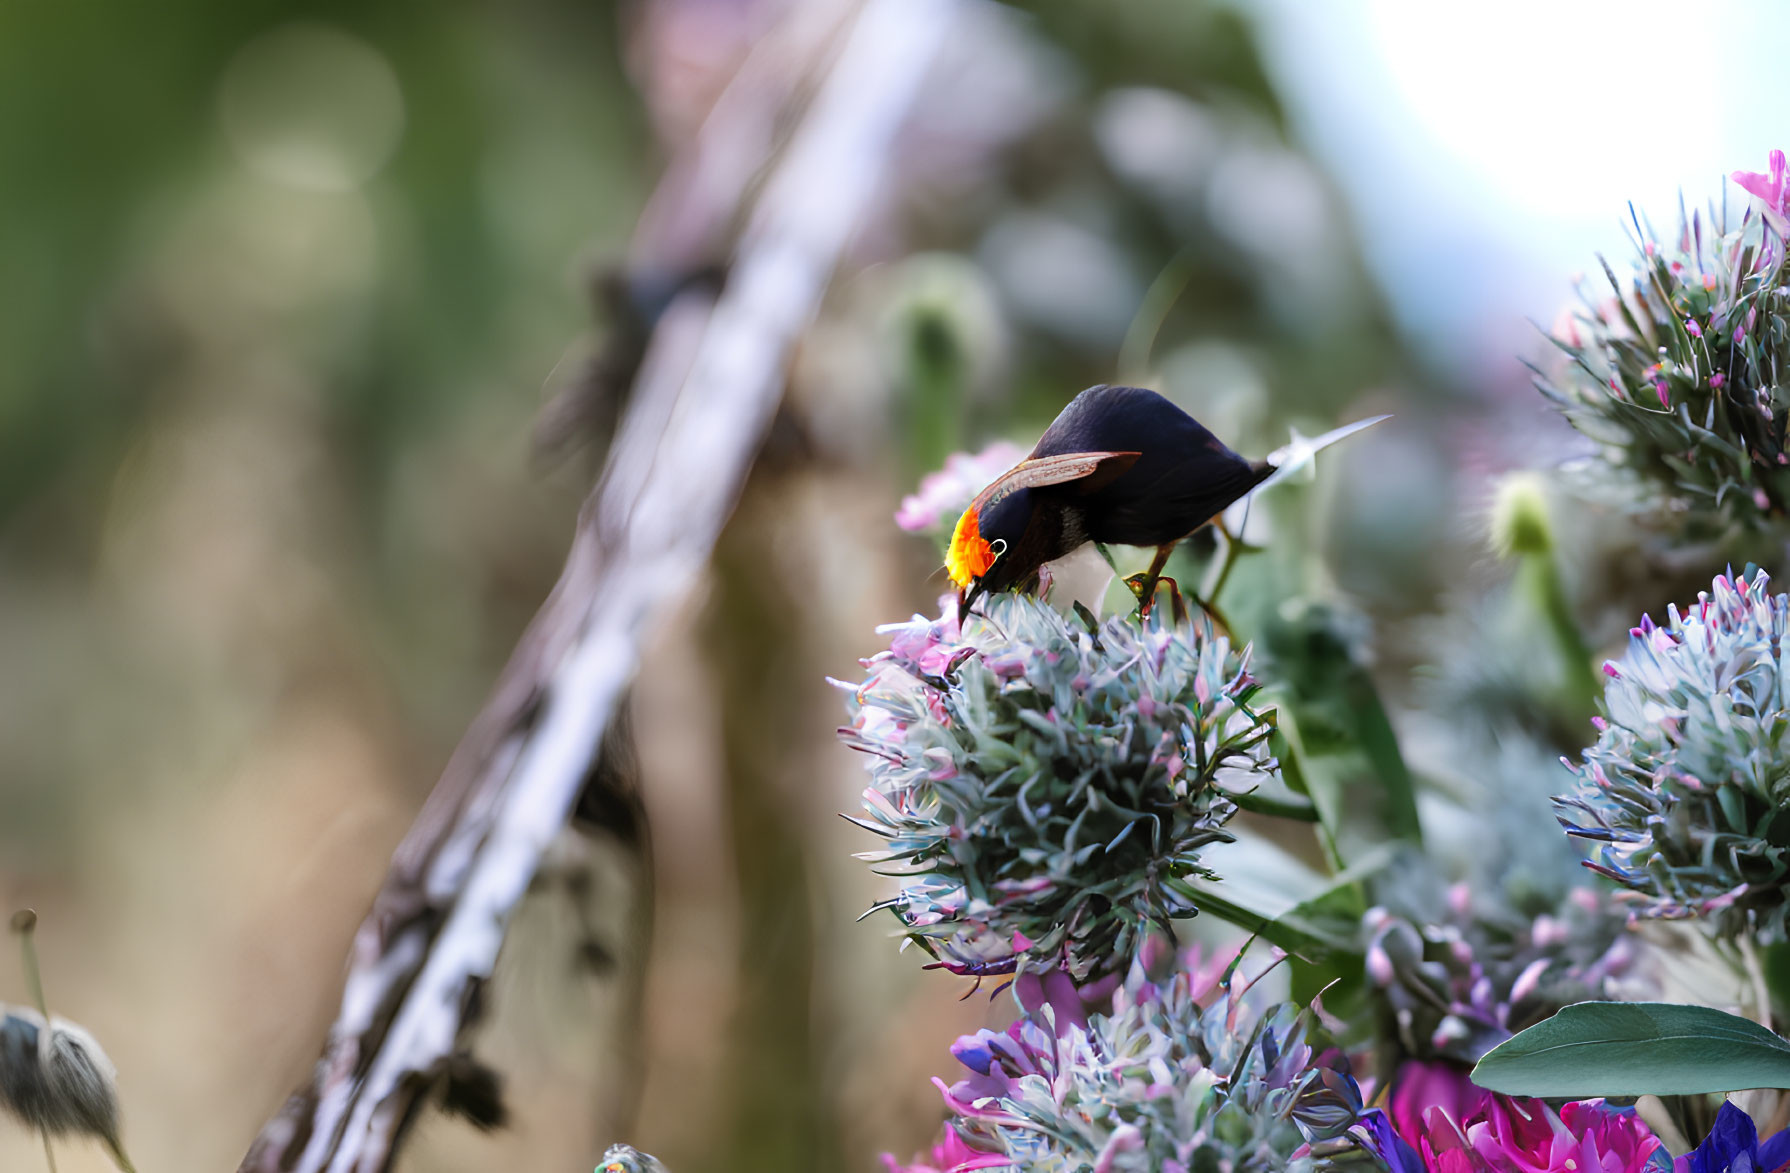 Colorful Bird Perched Among Purple Flowers in Soft-focus Setting